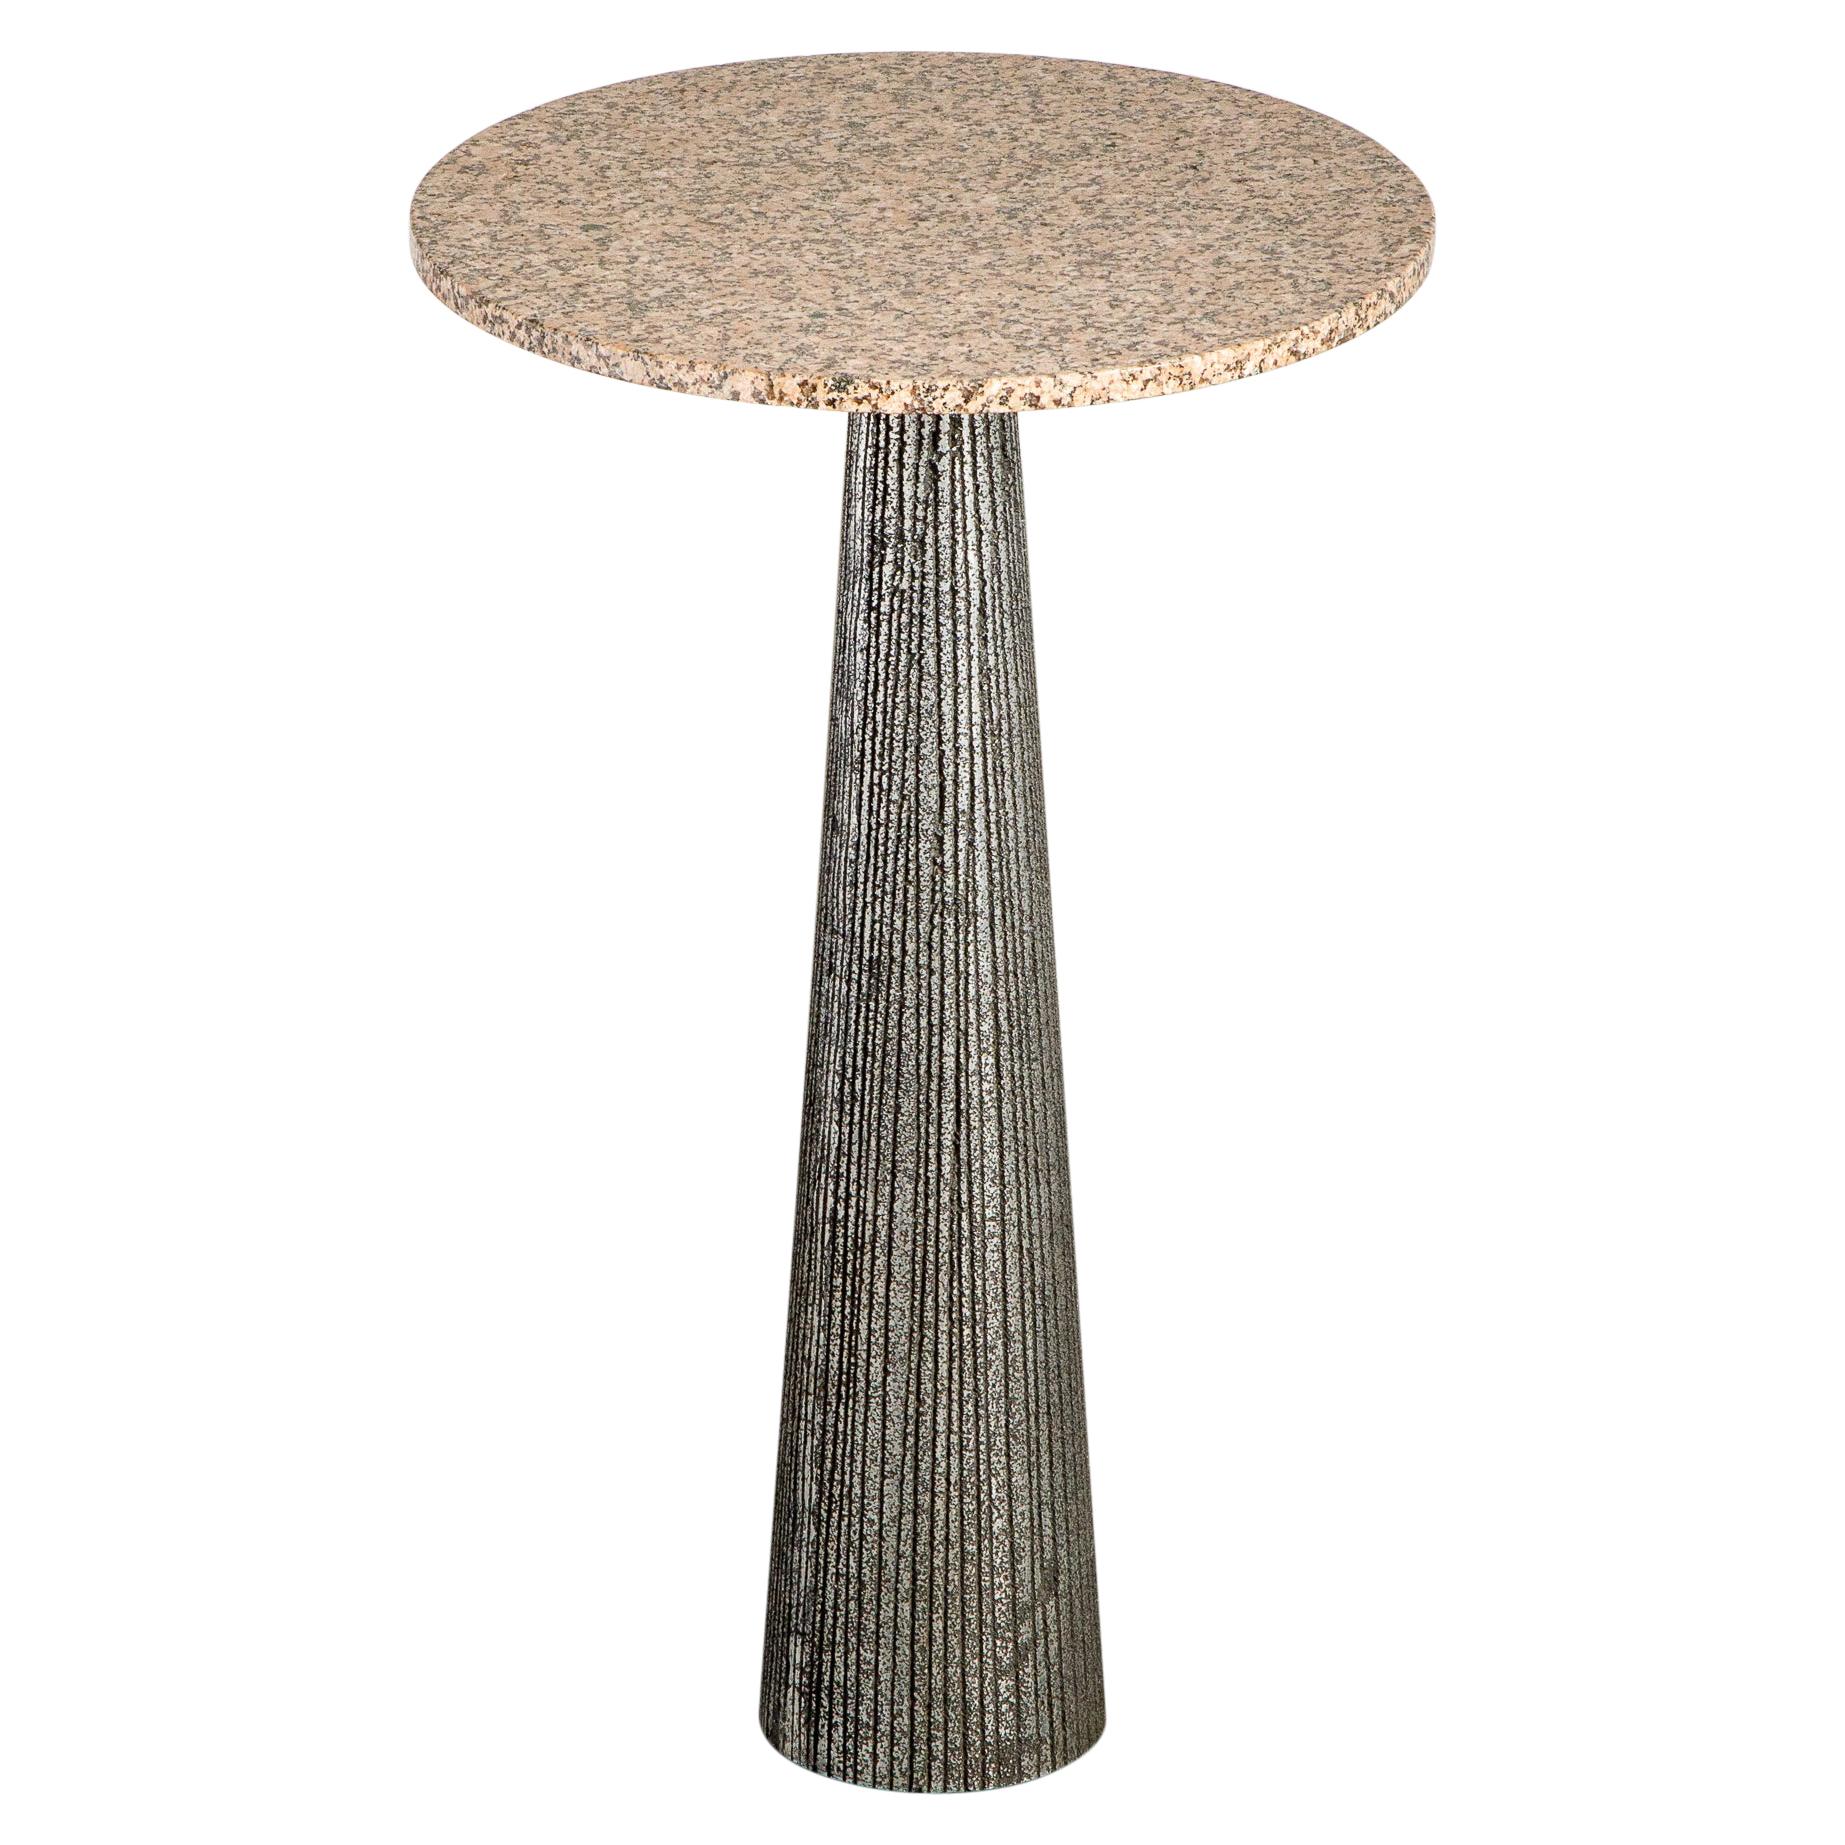 Rose Pink Granite and Aluminum Pedestal Table by Forms and Surfaces, circa 1968